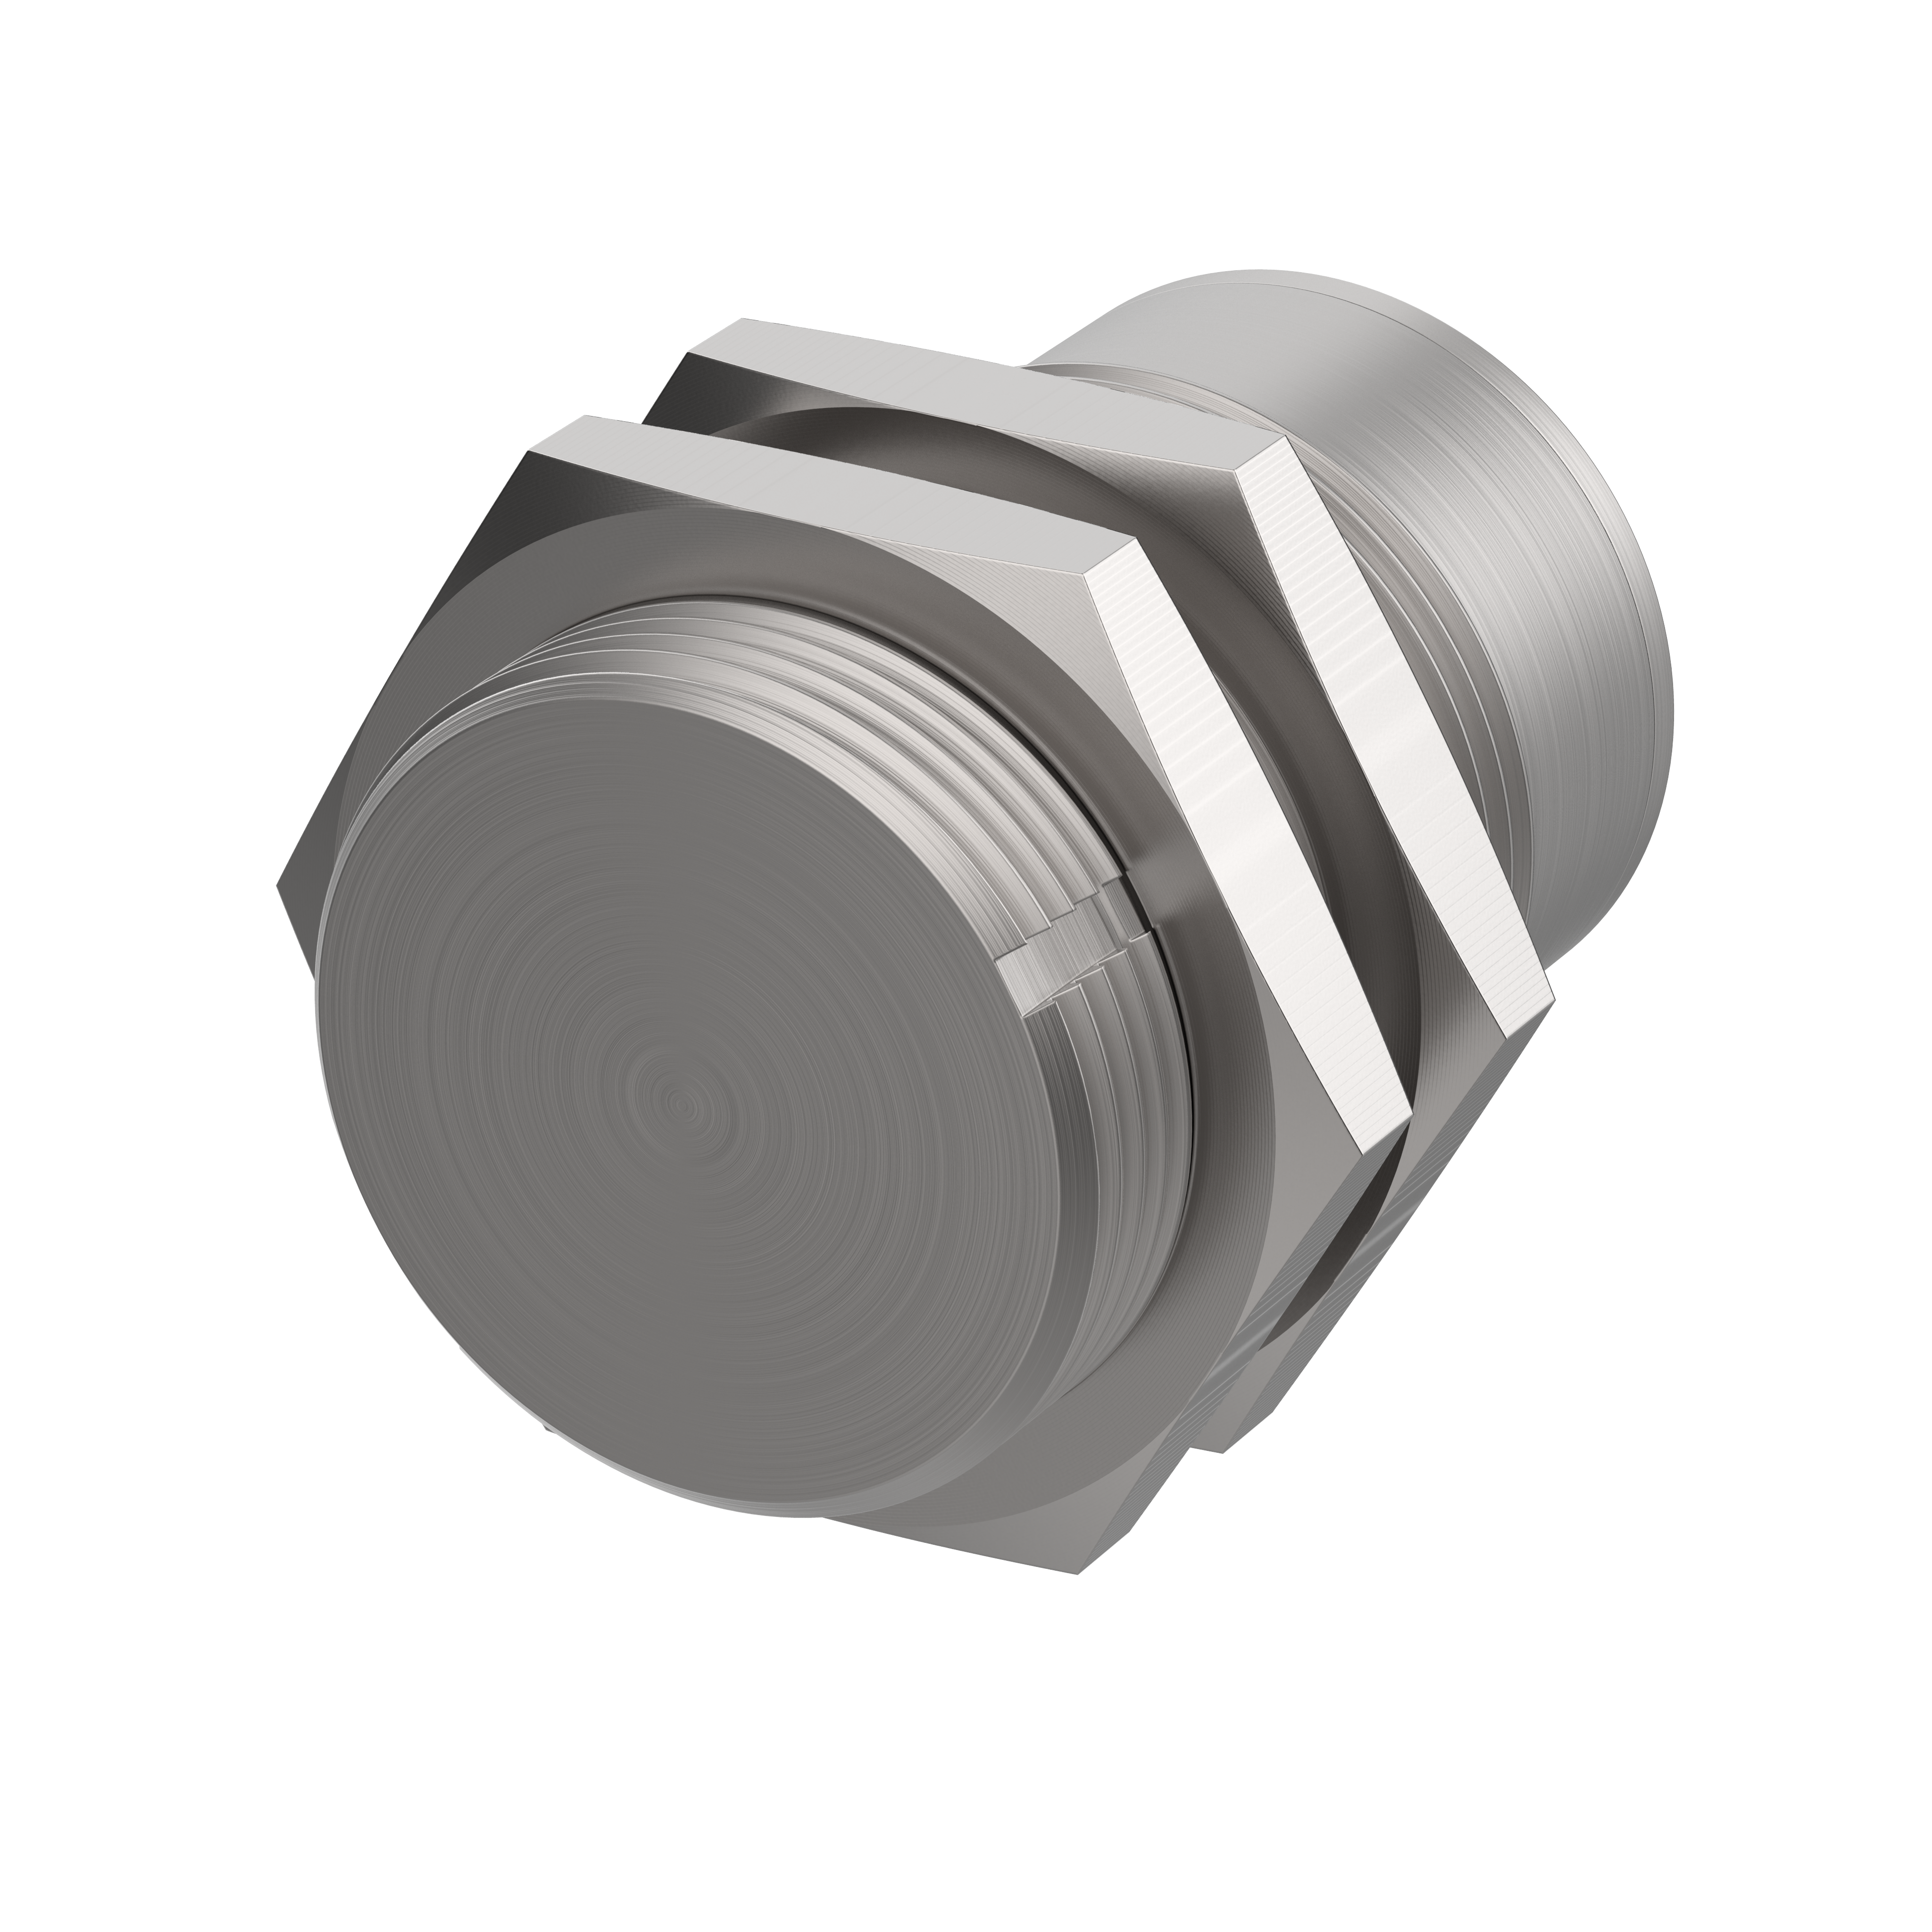 Safety sensor - 171V62VY - magnetically actuated - N.O./N.O., built-in connector M12